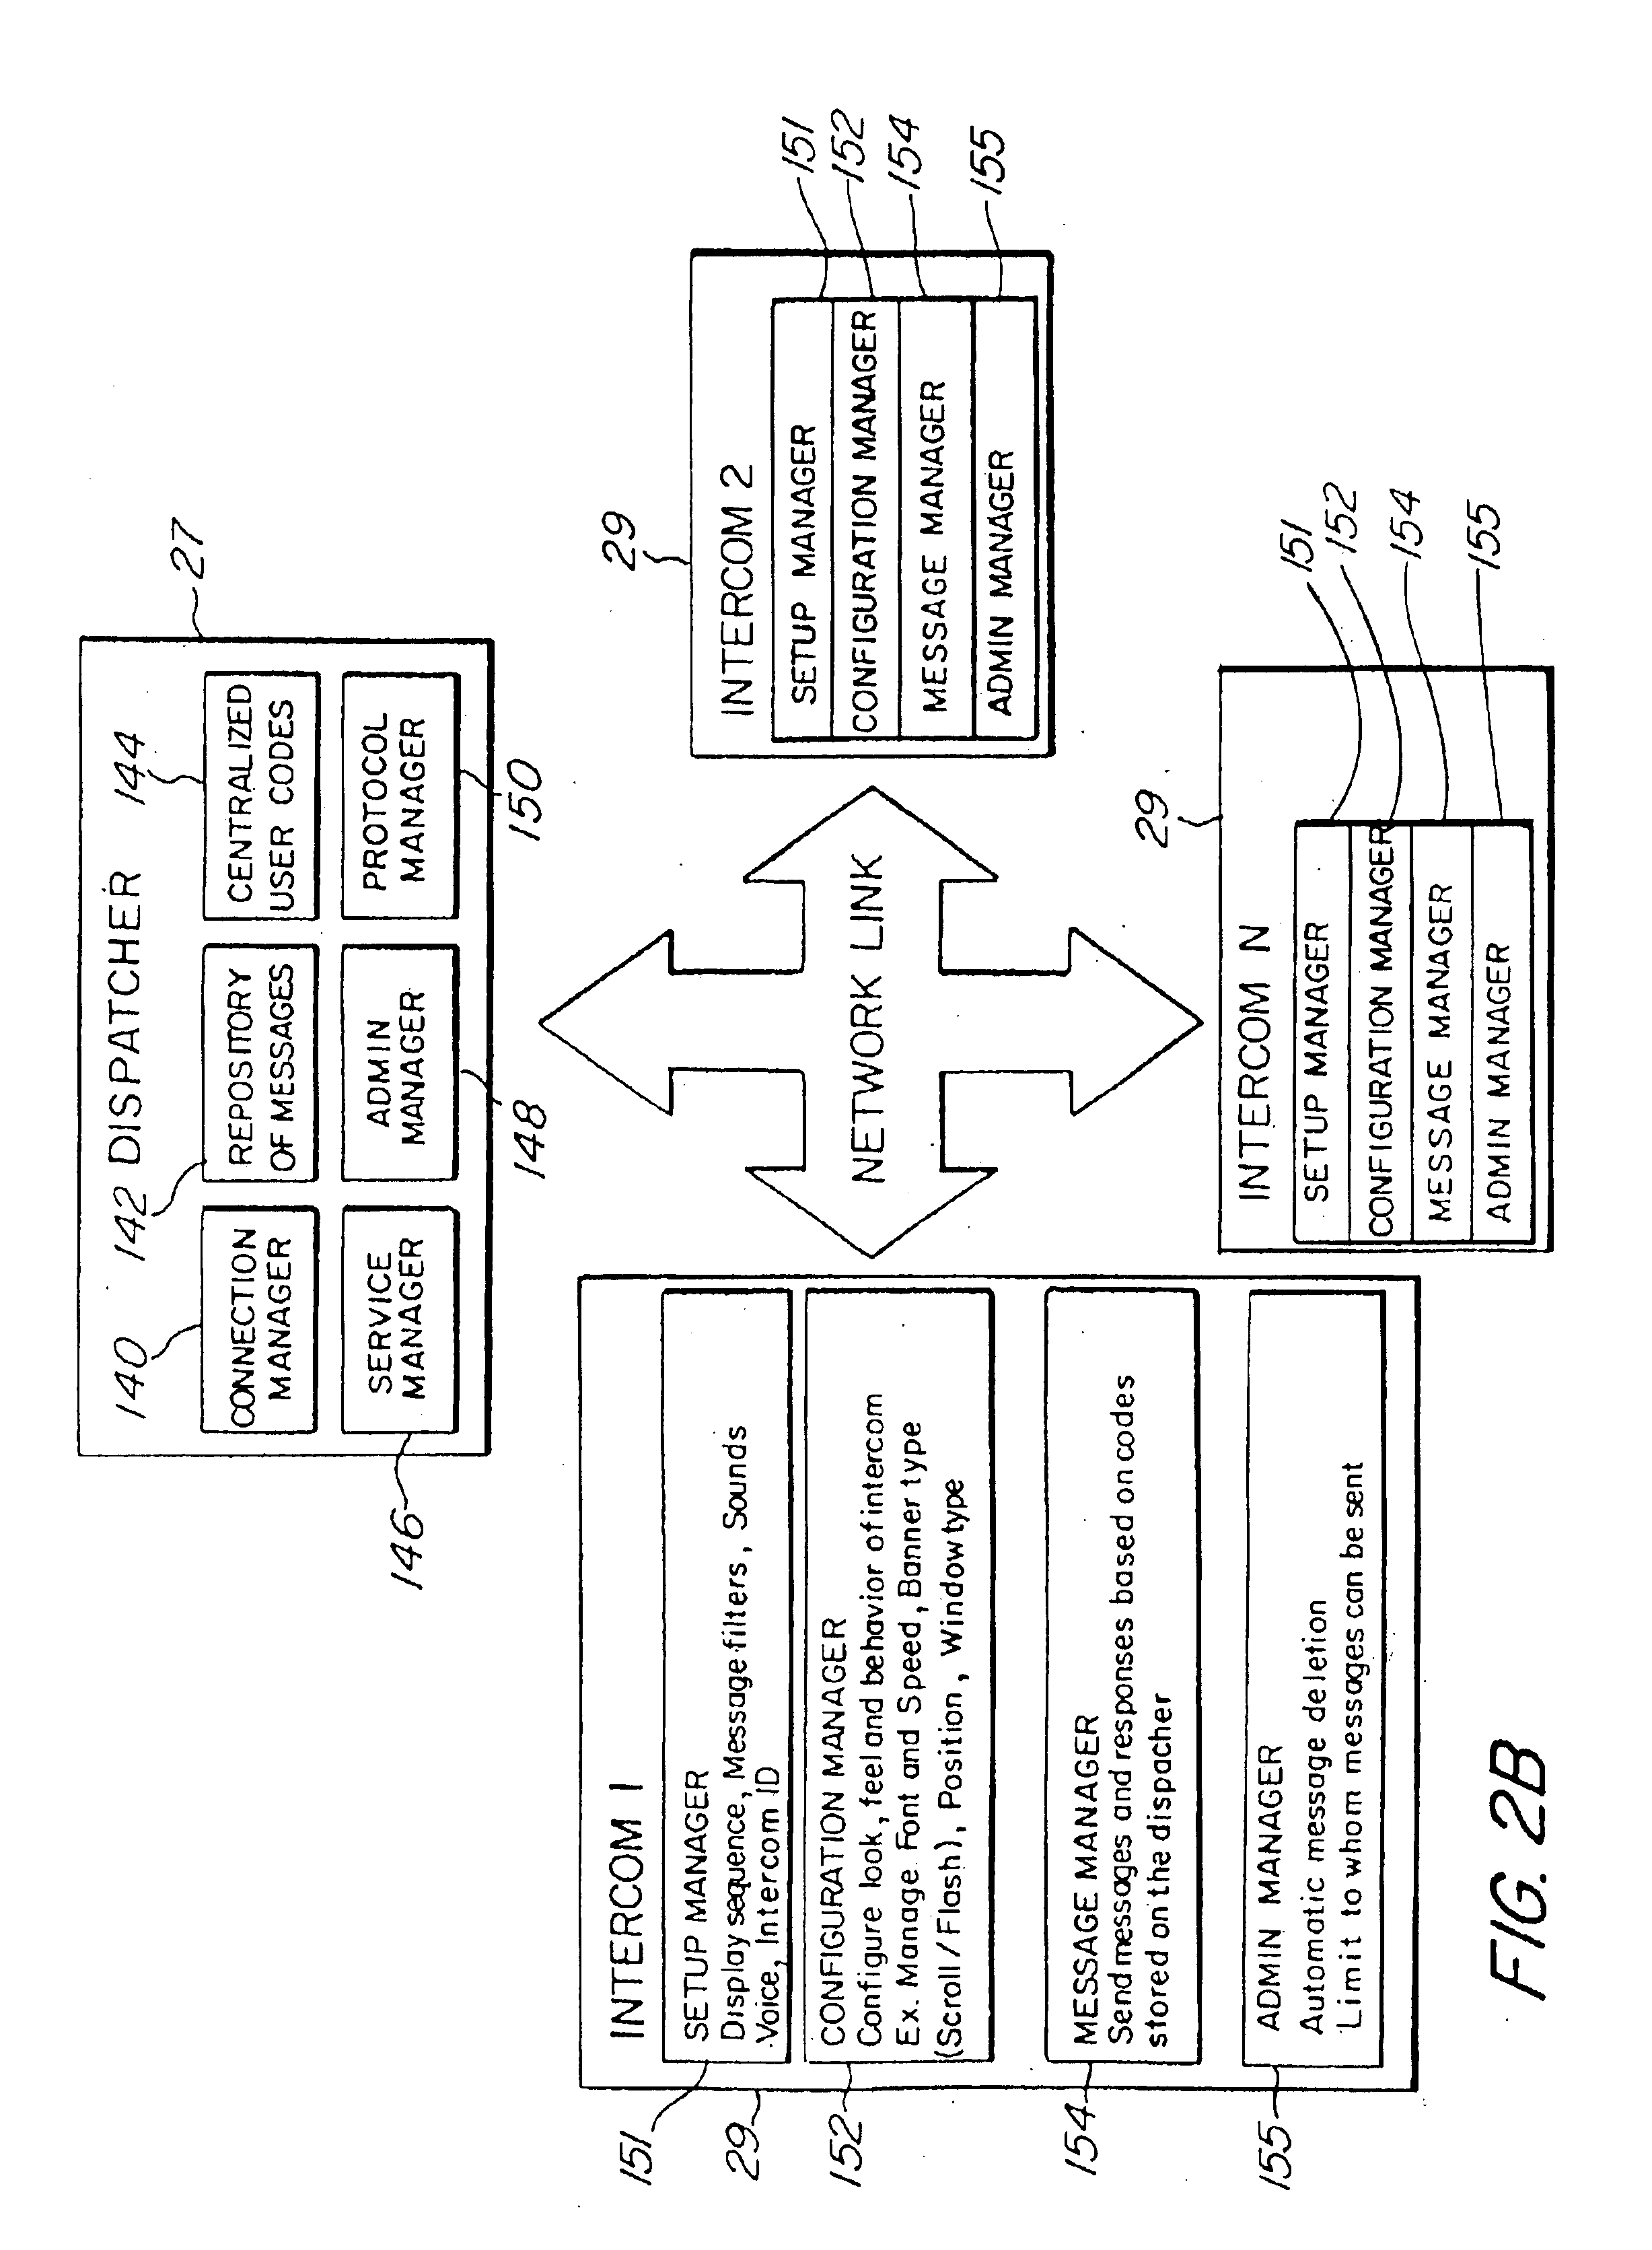 Network-based intercom system and method for simulating a hardware based dedicated intercom system